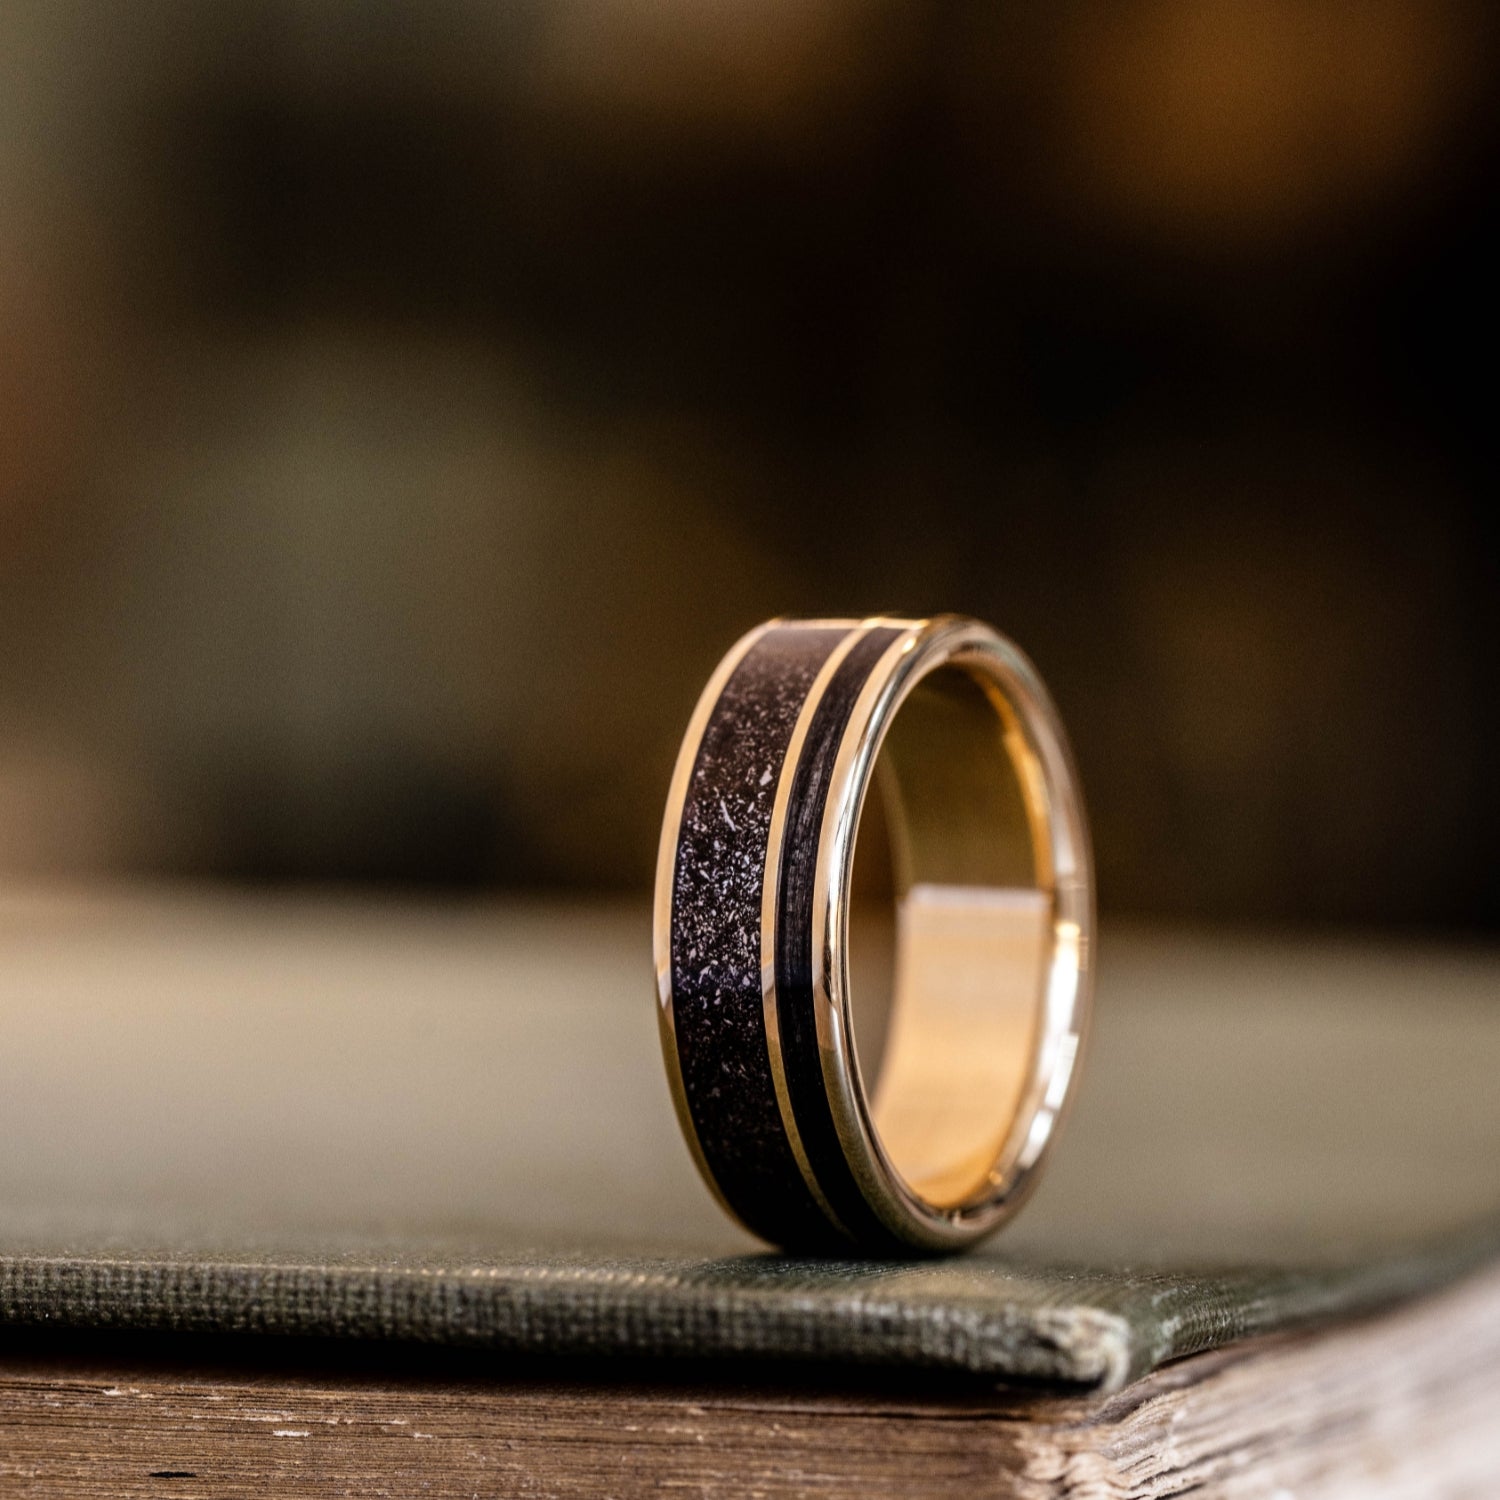 Tungsten Ring for Men Wedding Band Black Sandstone Inlaid Gold Dome